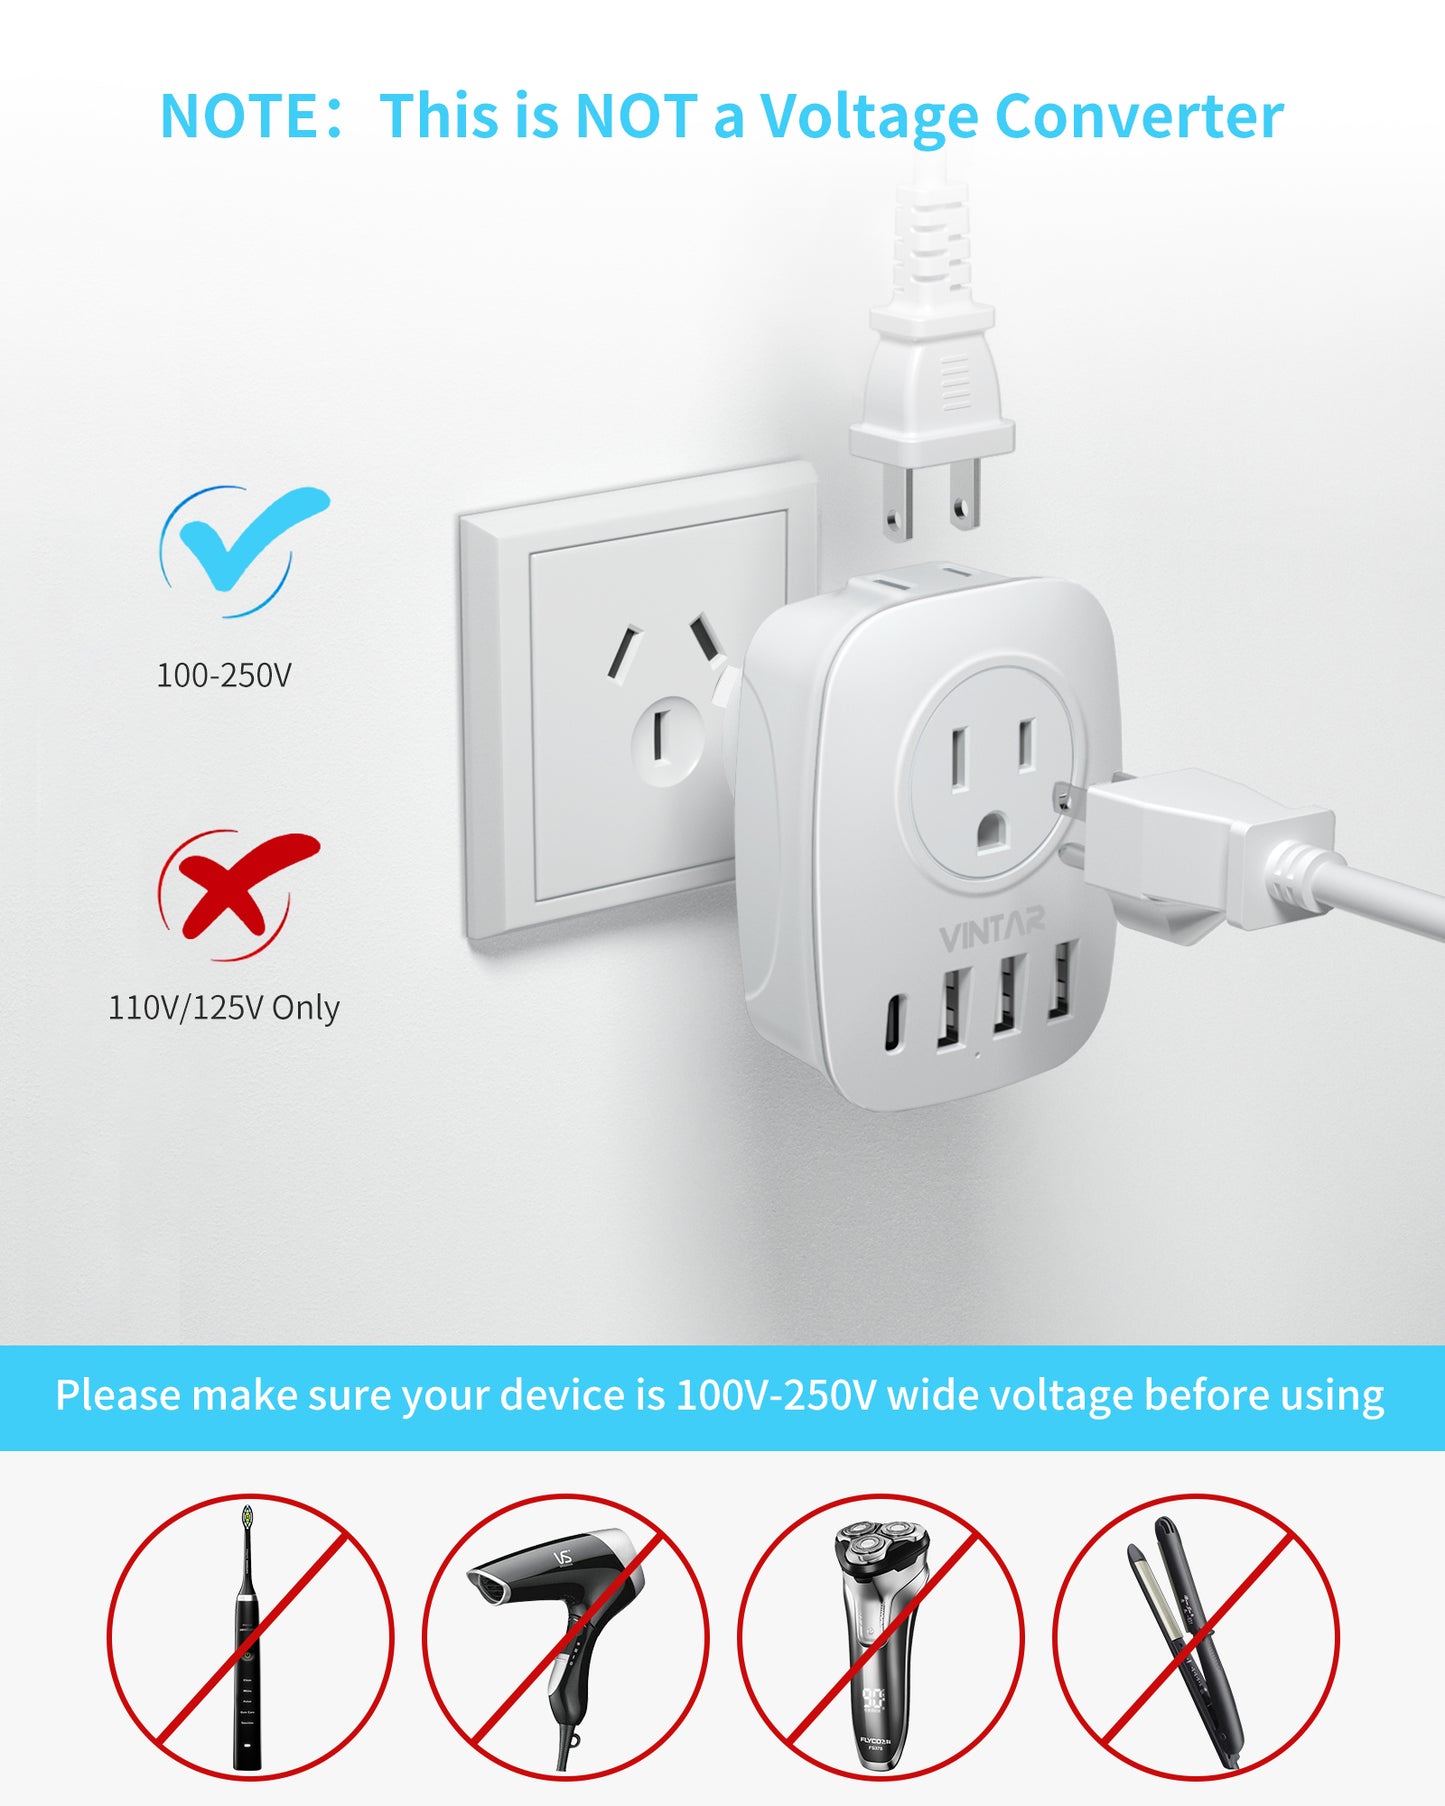 [2-Pack] Australia New Zealand Power Plug Adapter, VINTAR Australia Travel Adapter with 1 USB C,3 USB Ports and 2 American Outlets, 6 in 1 Type I Plug Adapter for US to Australia, China, Argentina